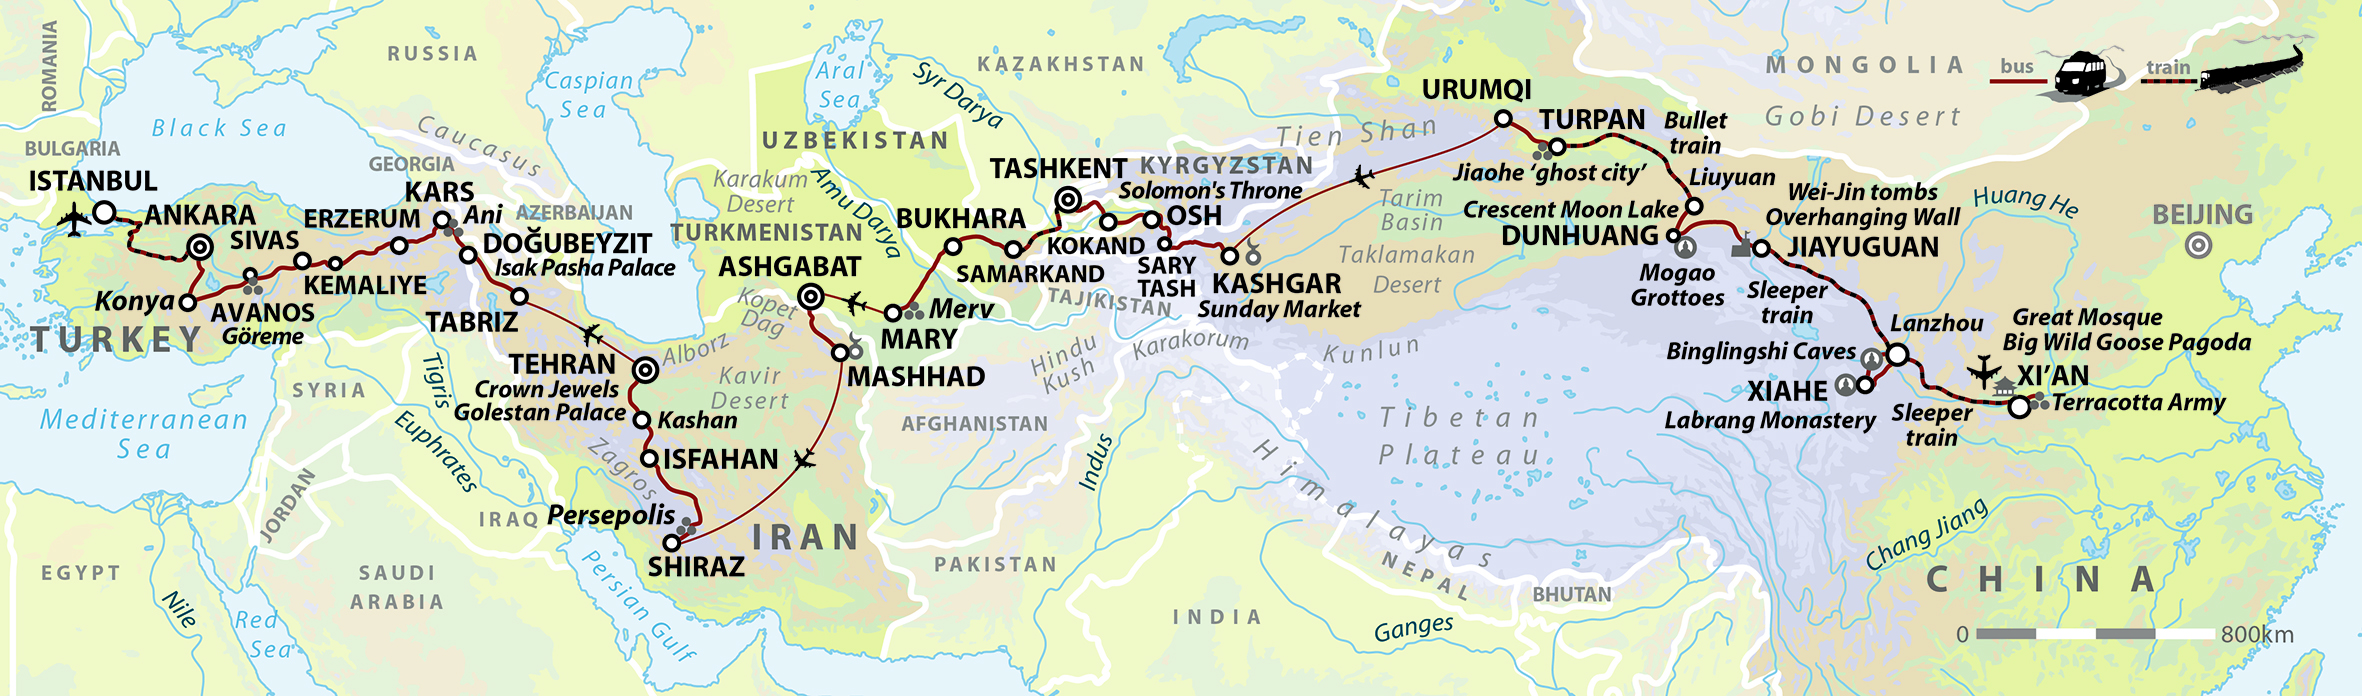 tourhub | Wild Frontiers | The Great Silk Road Adventure: Xi'an to Istanbul | Tour Map